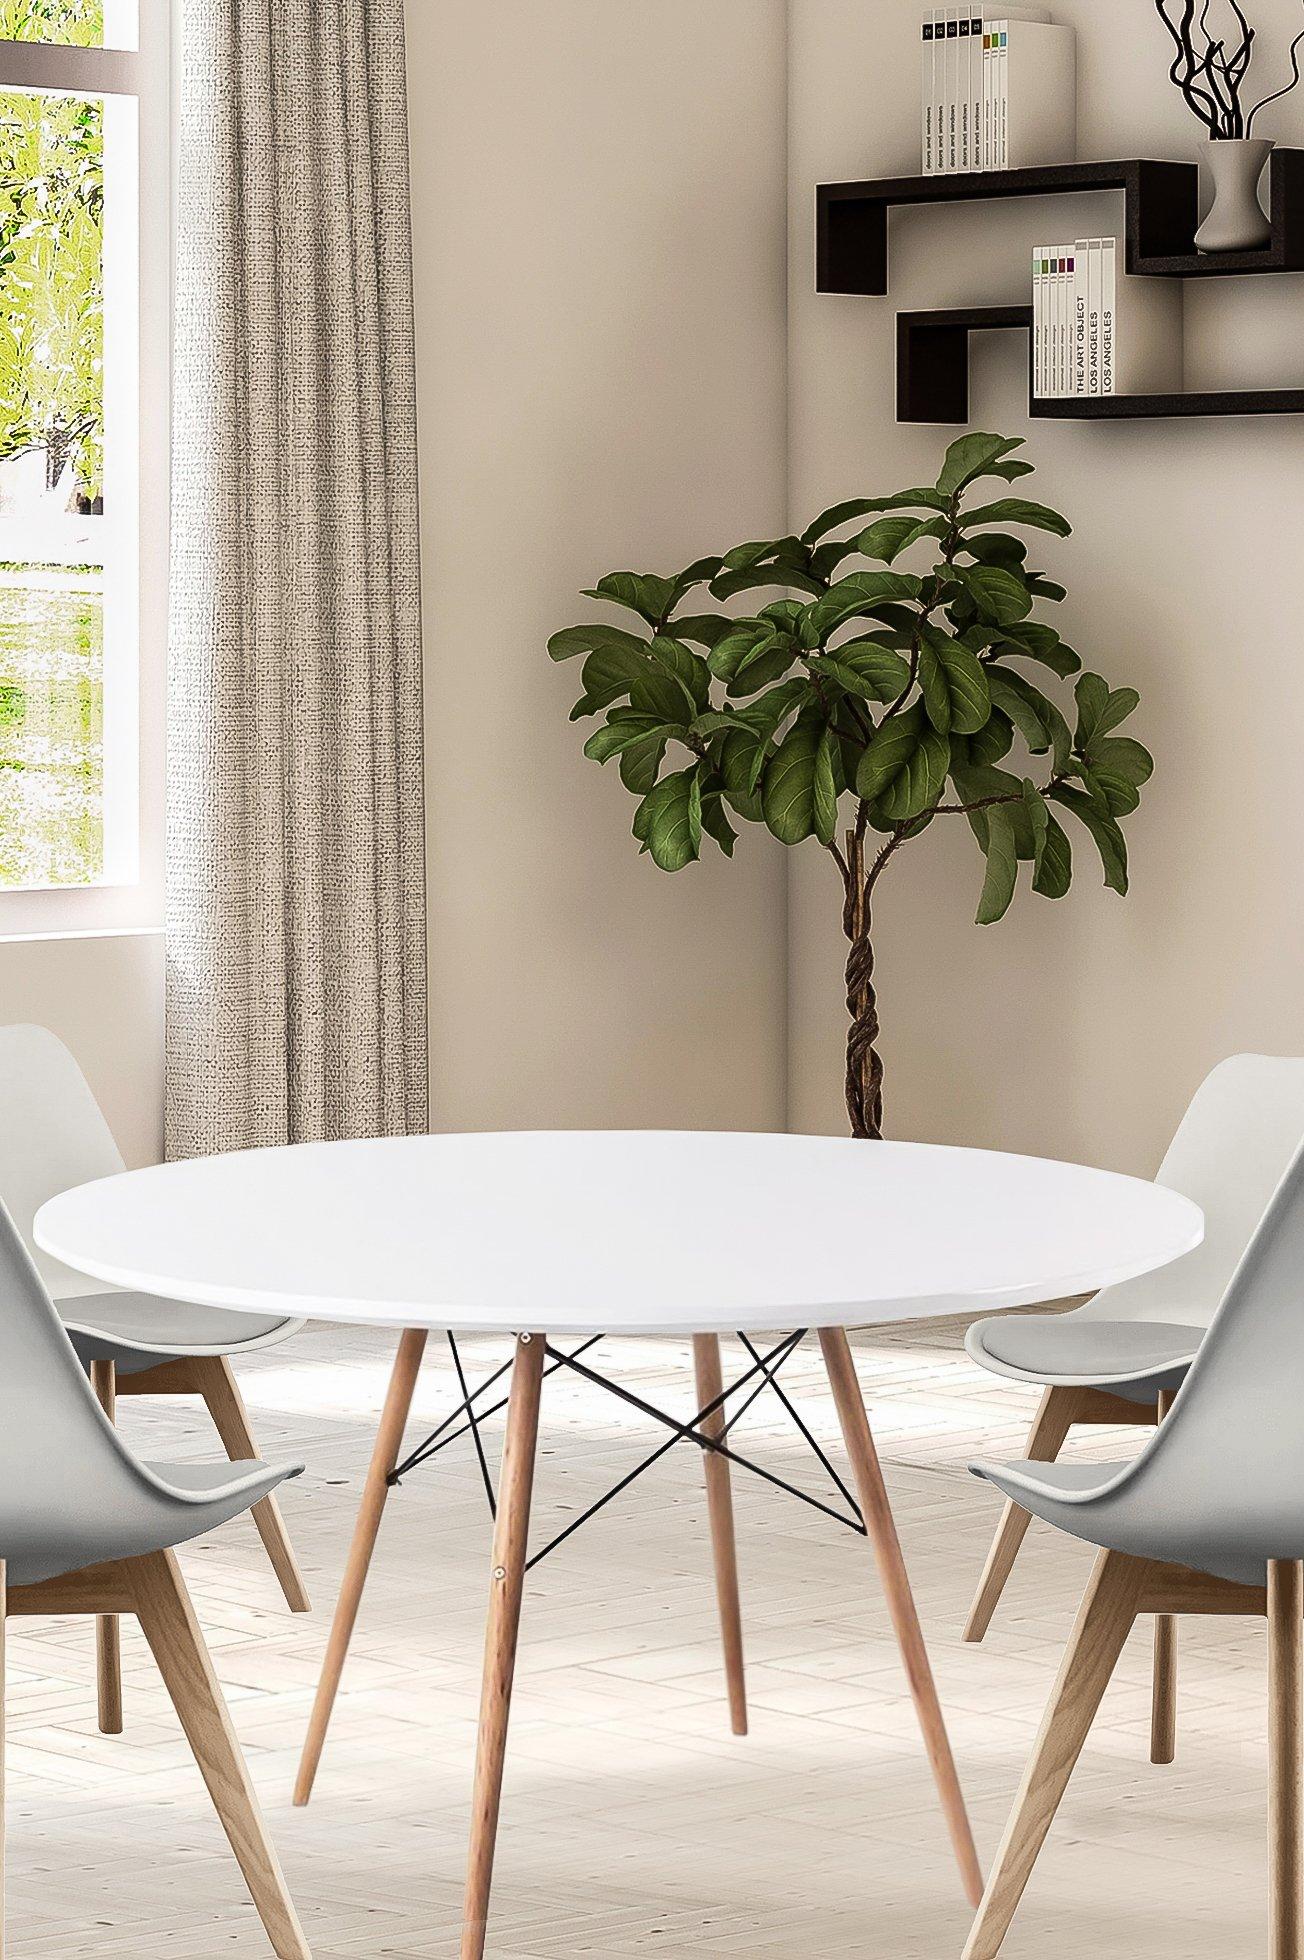 Soho Large White Circular Dining Table with Beech Wood Legs